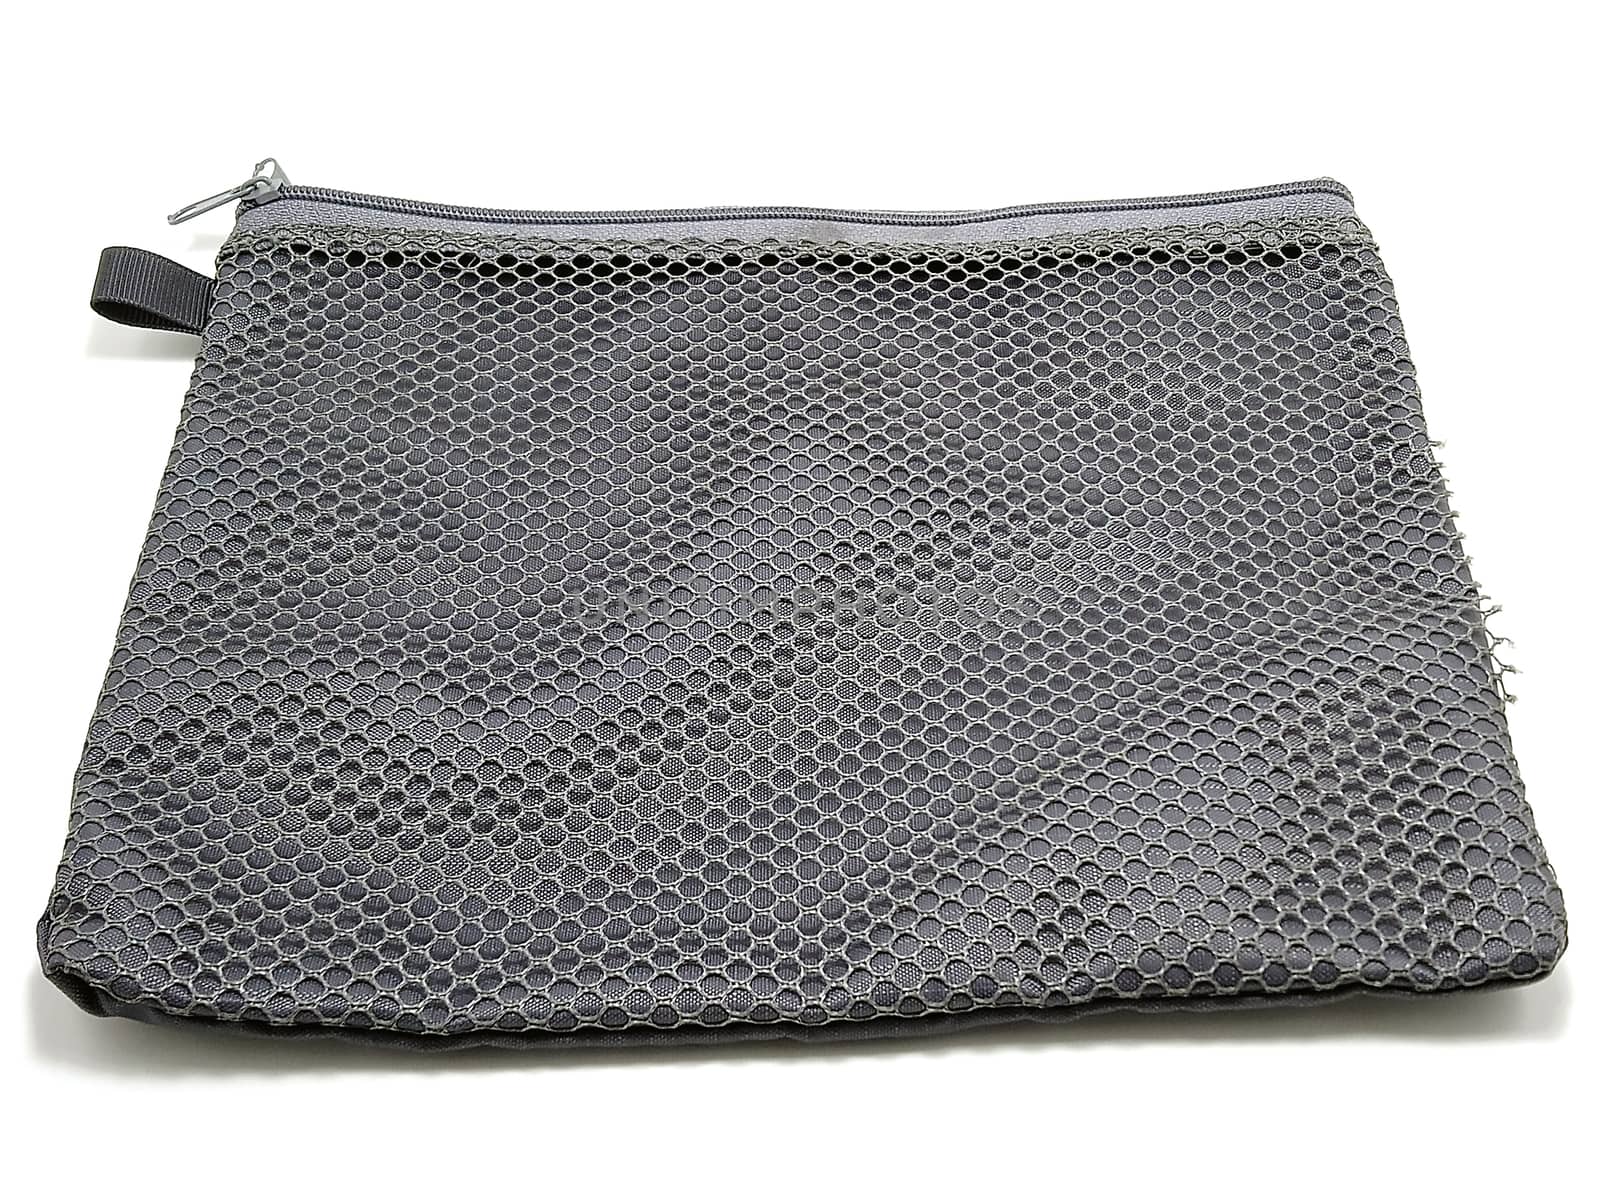 Small gray mesh bag with zipper use to put things inside